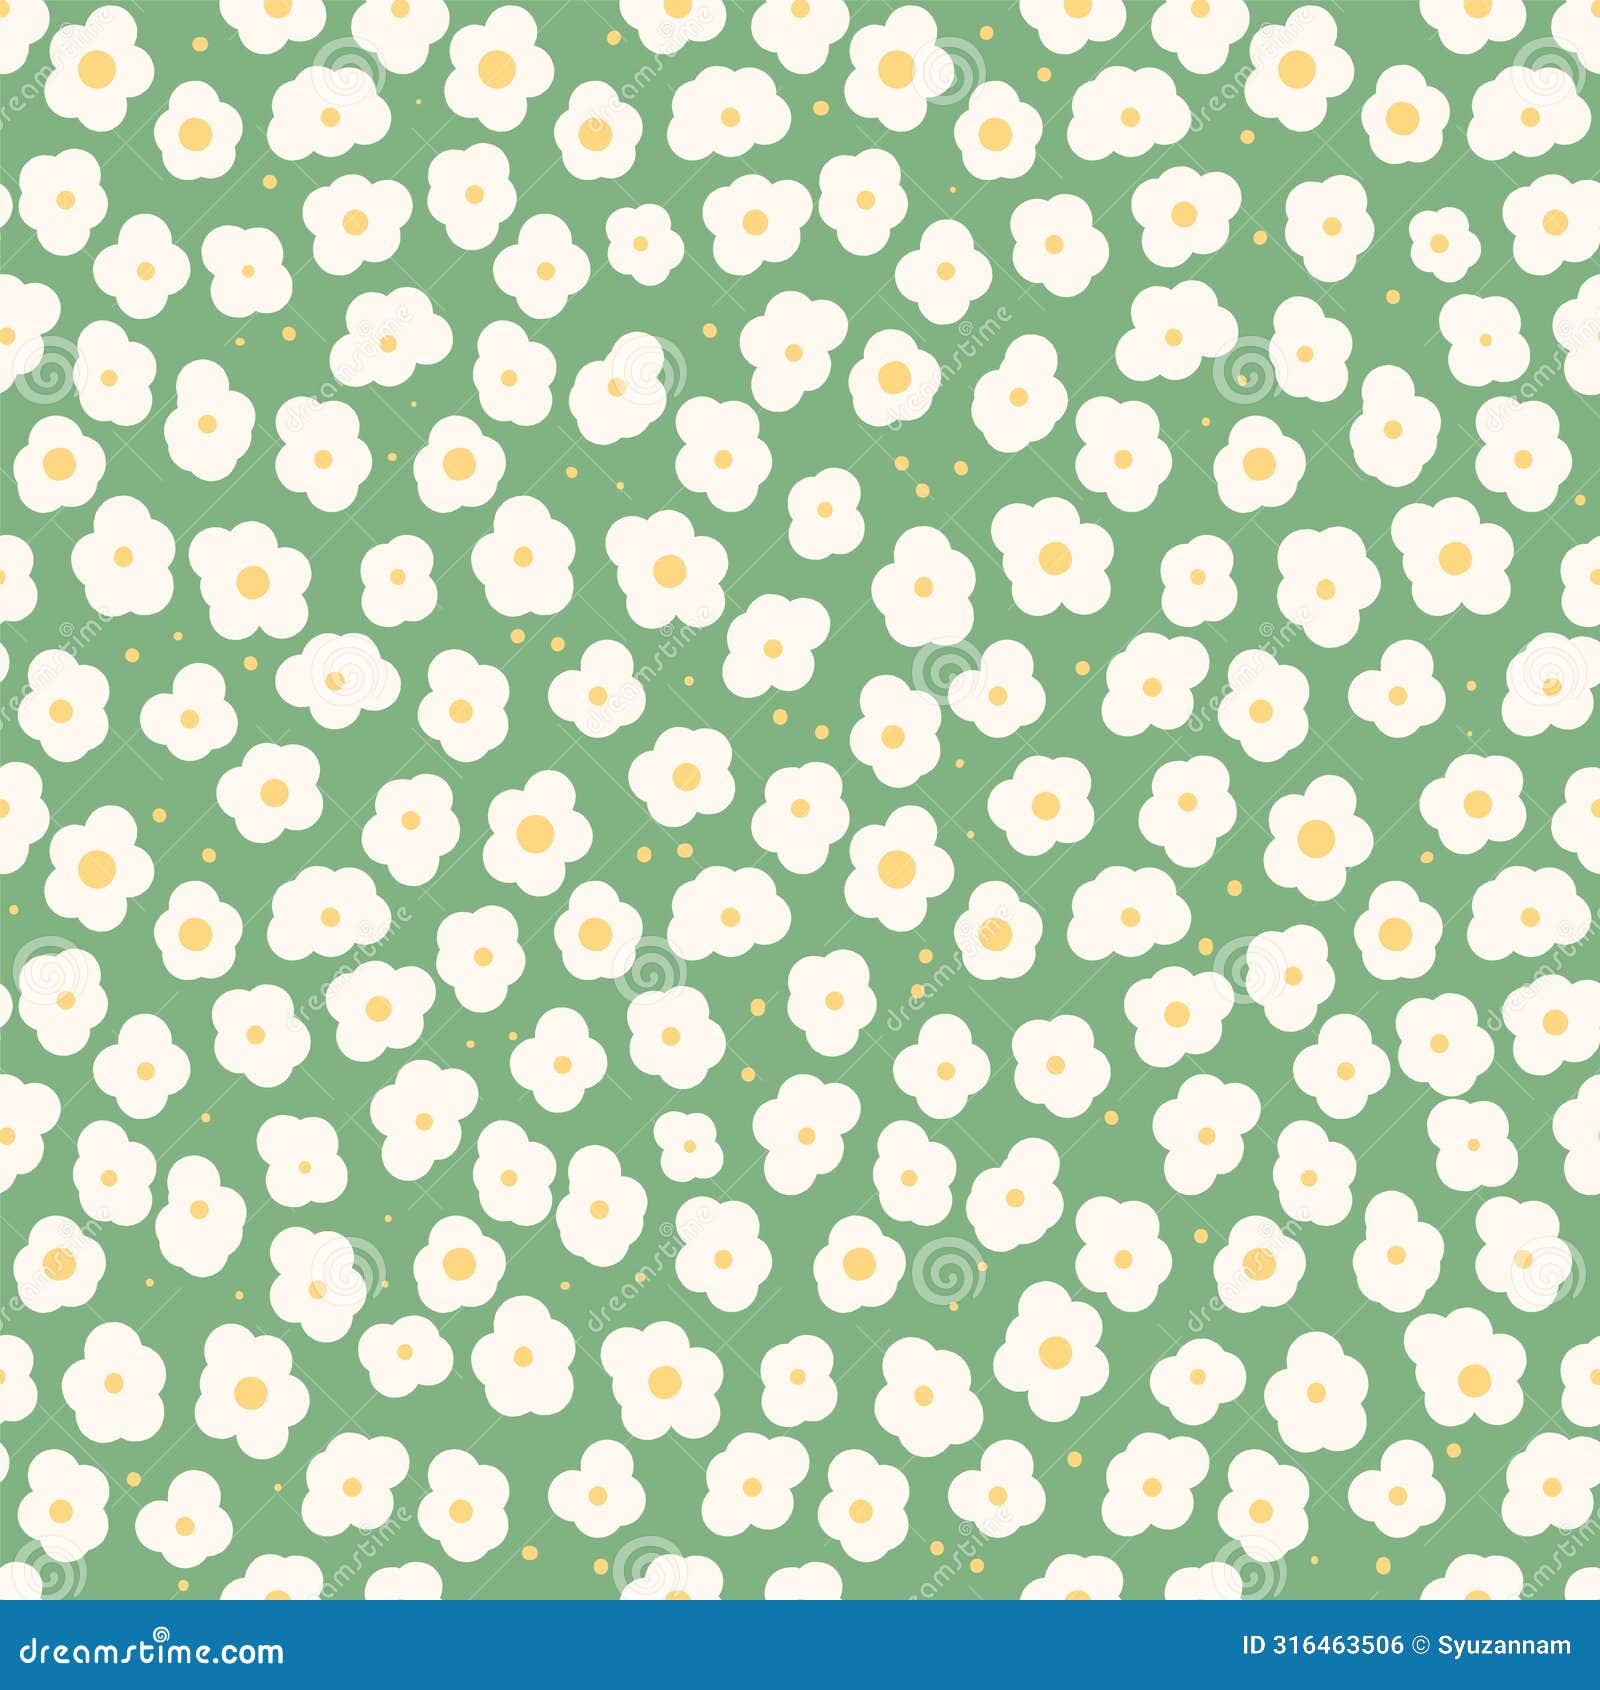 camomile seamless pattern. simple floral endless background. mayweed flower ornament tile. happy summer botanic repeat cover.